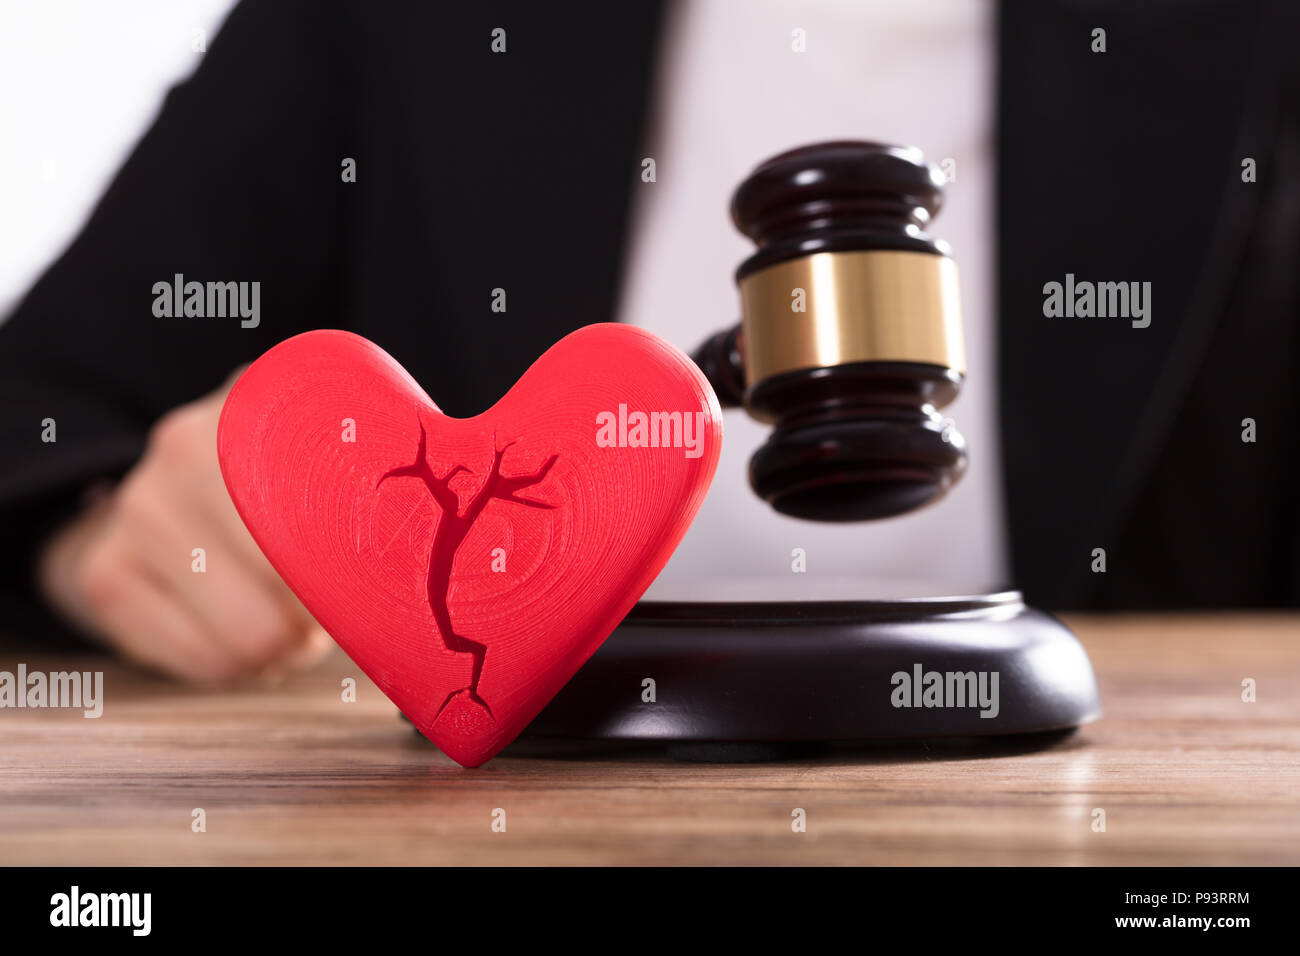 Close-up Of A Broken Red Heart In Front Of Judge Striking Mallet Stock Photo